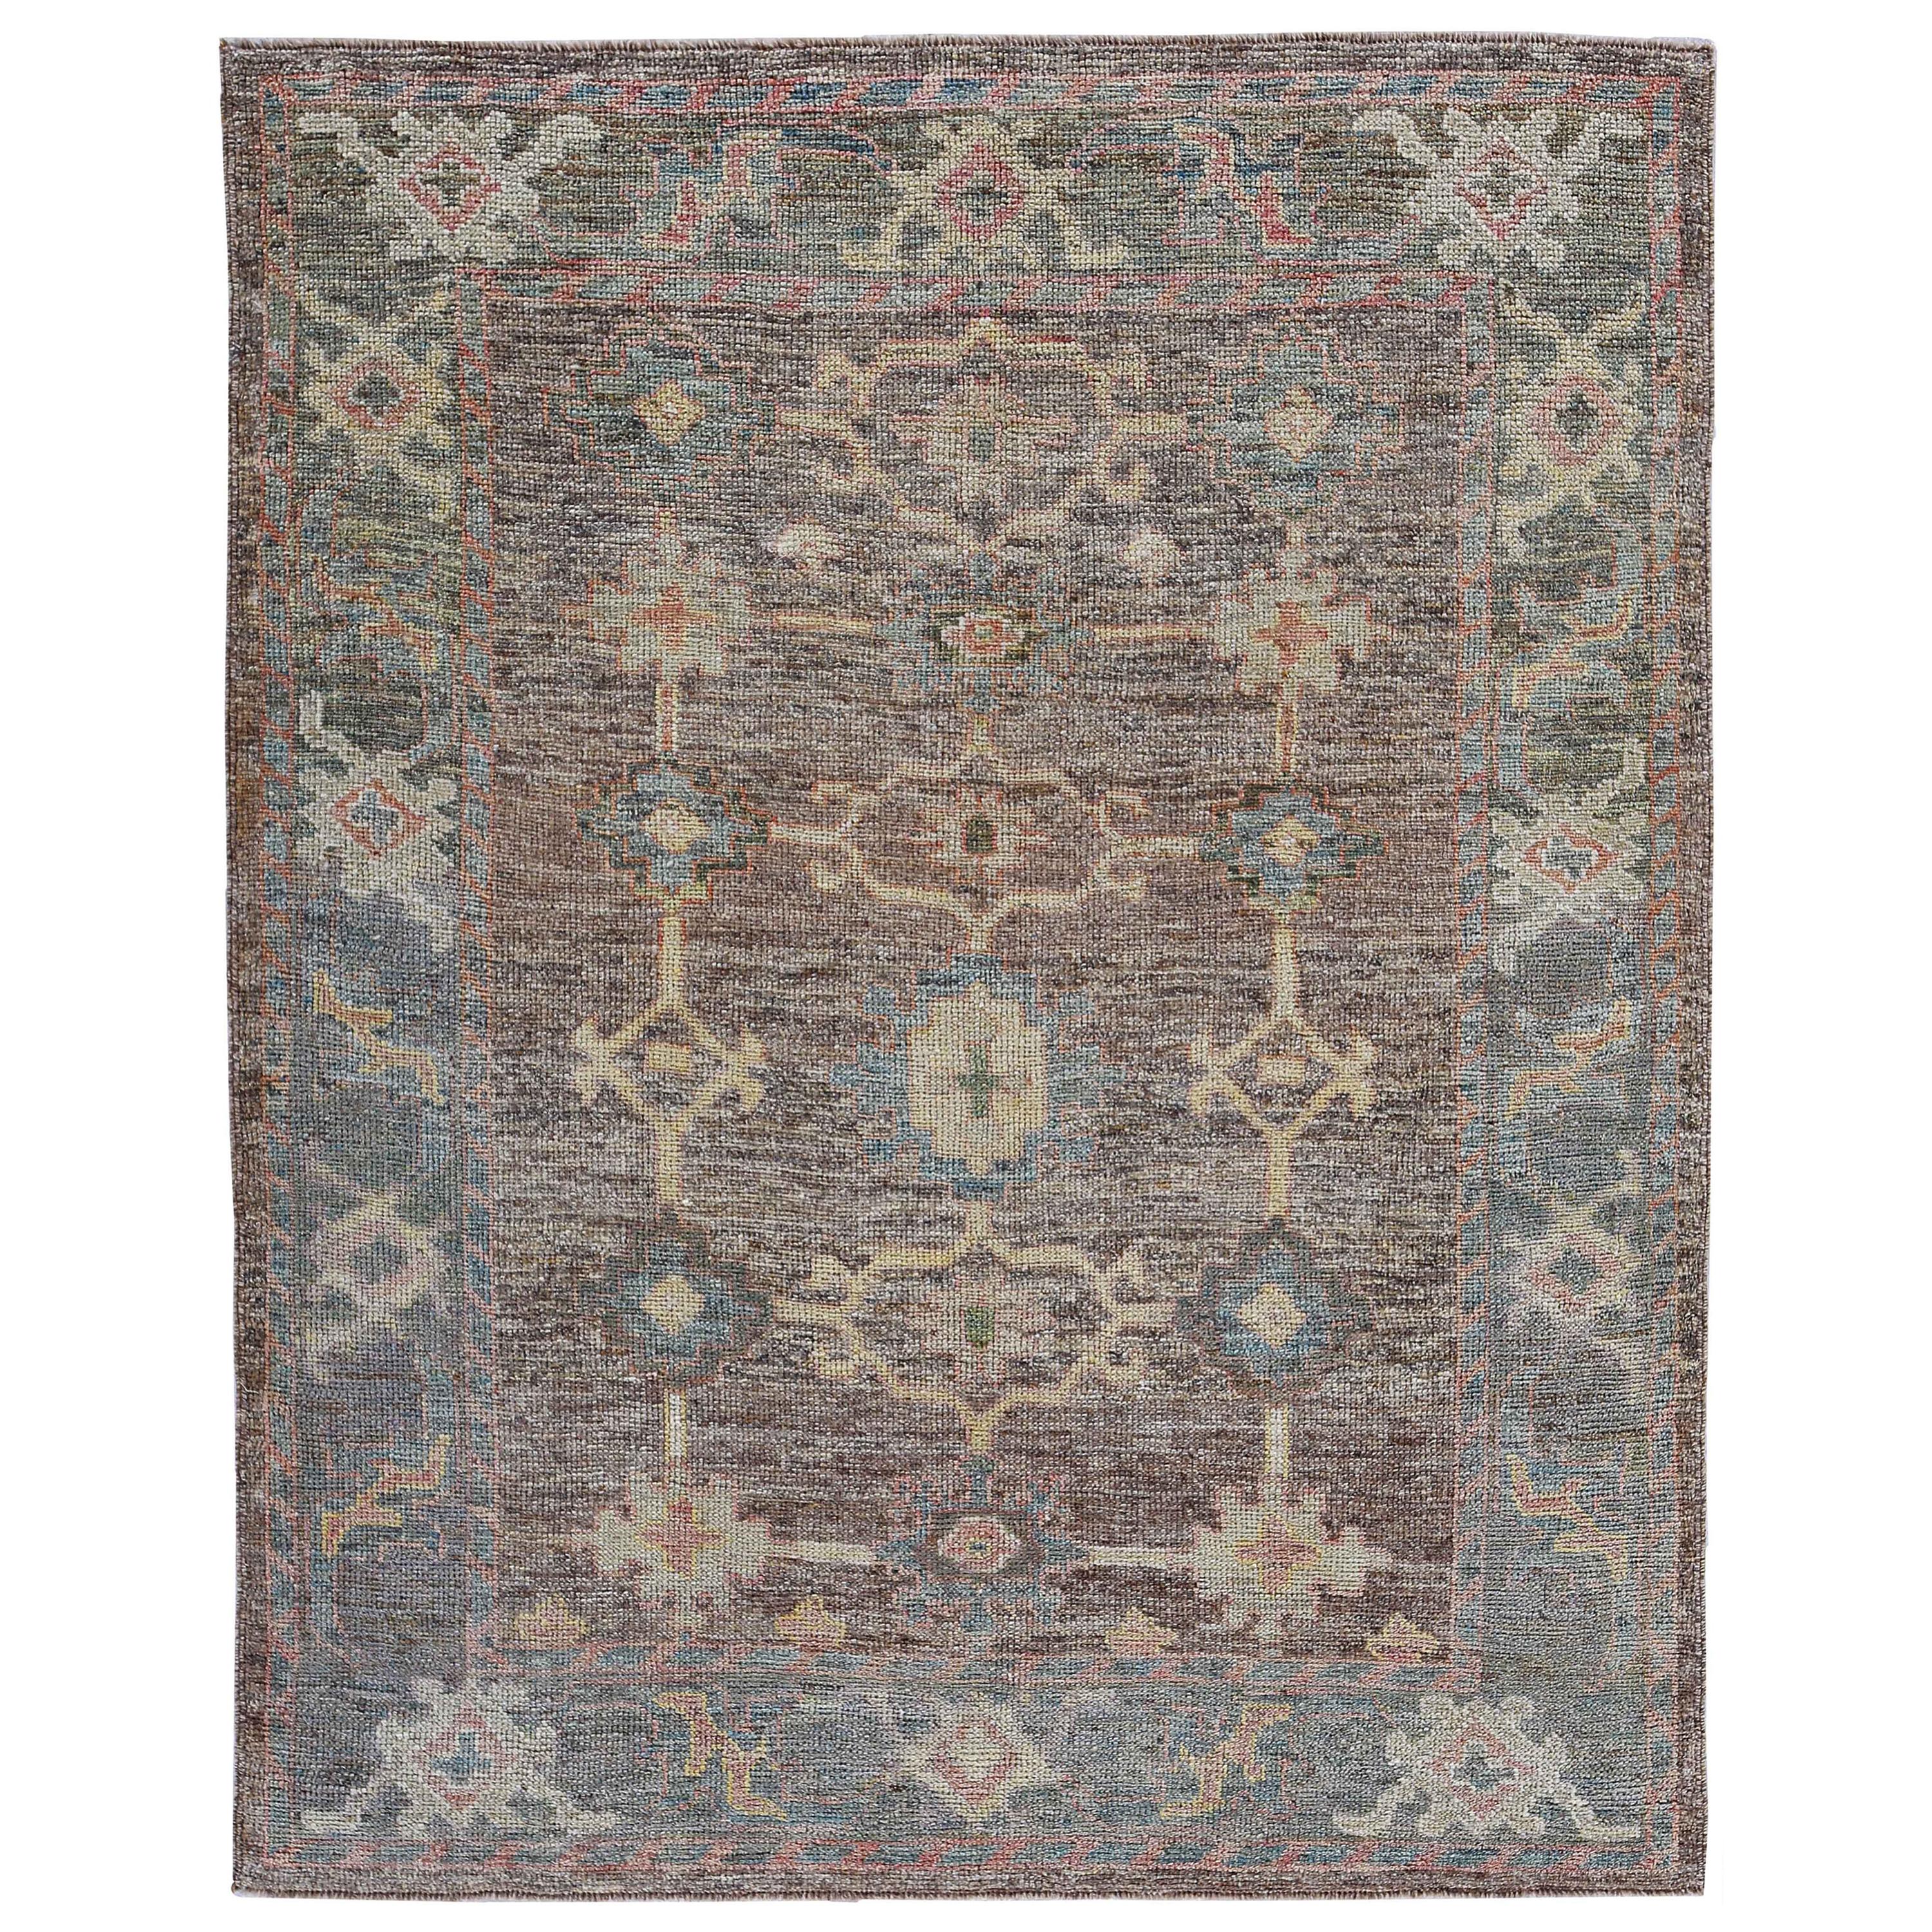 Nazmiyal Collection Earth Tone Modern Turkish Oushak Rug 5 ft 1 in x 6 ft 5 in